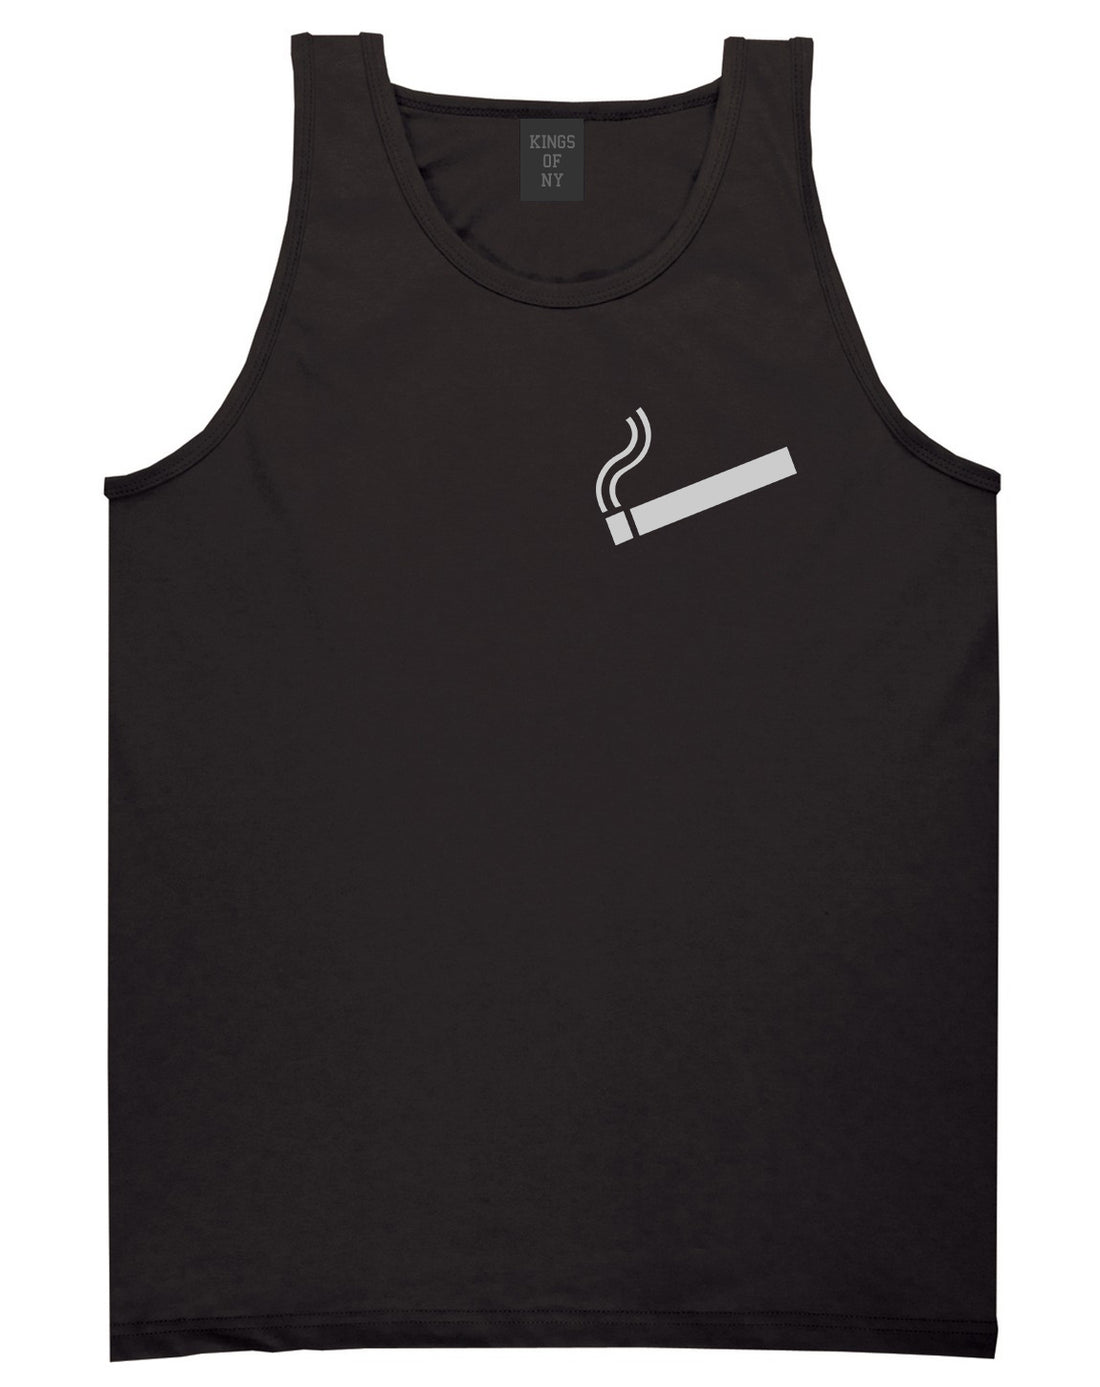 Cigarette Chest Black Tank Top Shirt by Kings Of NY